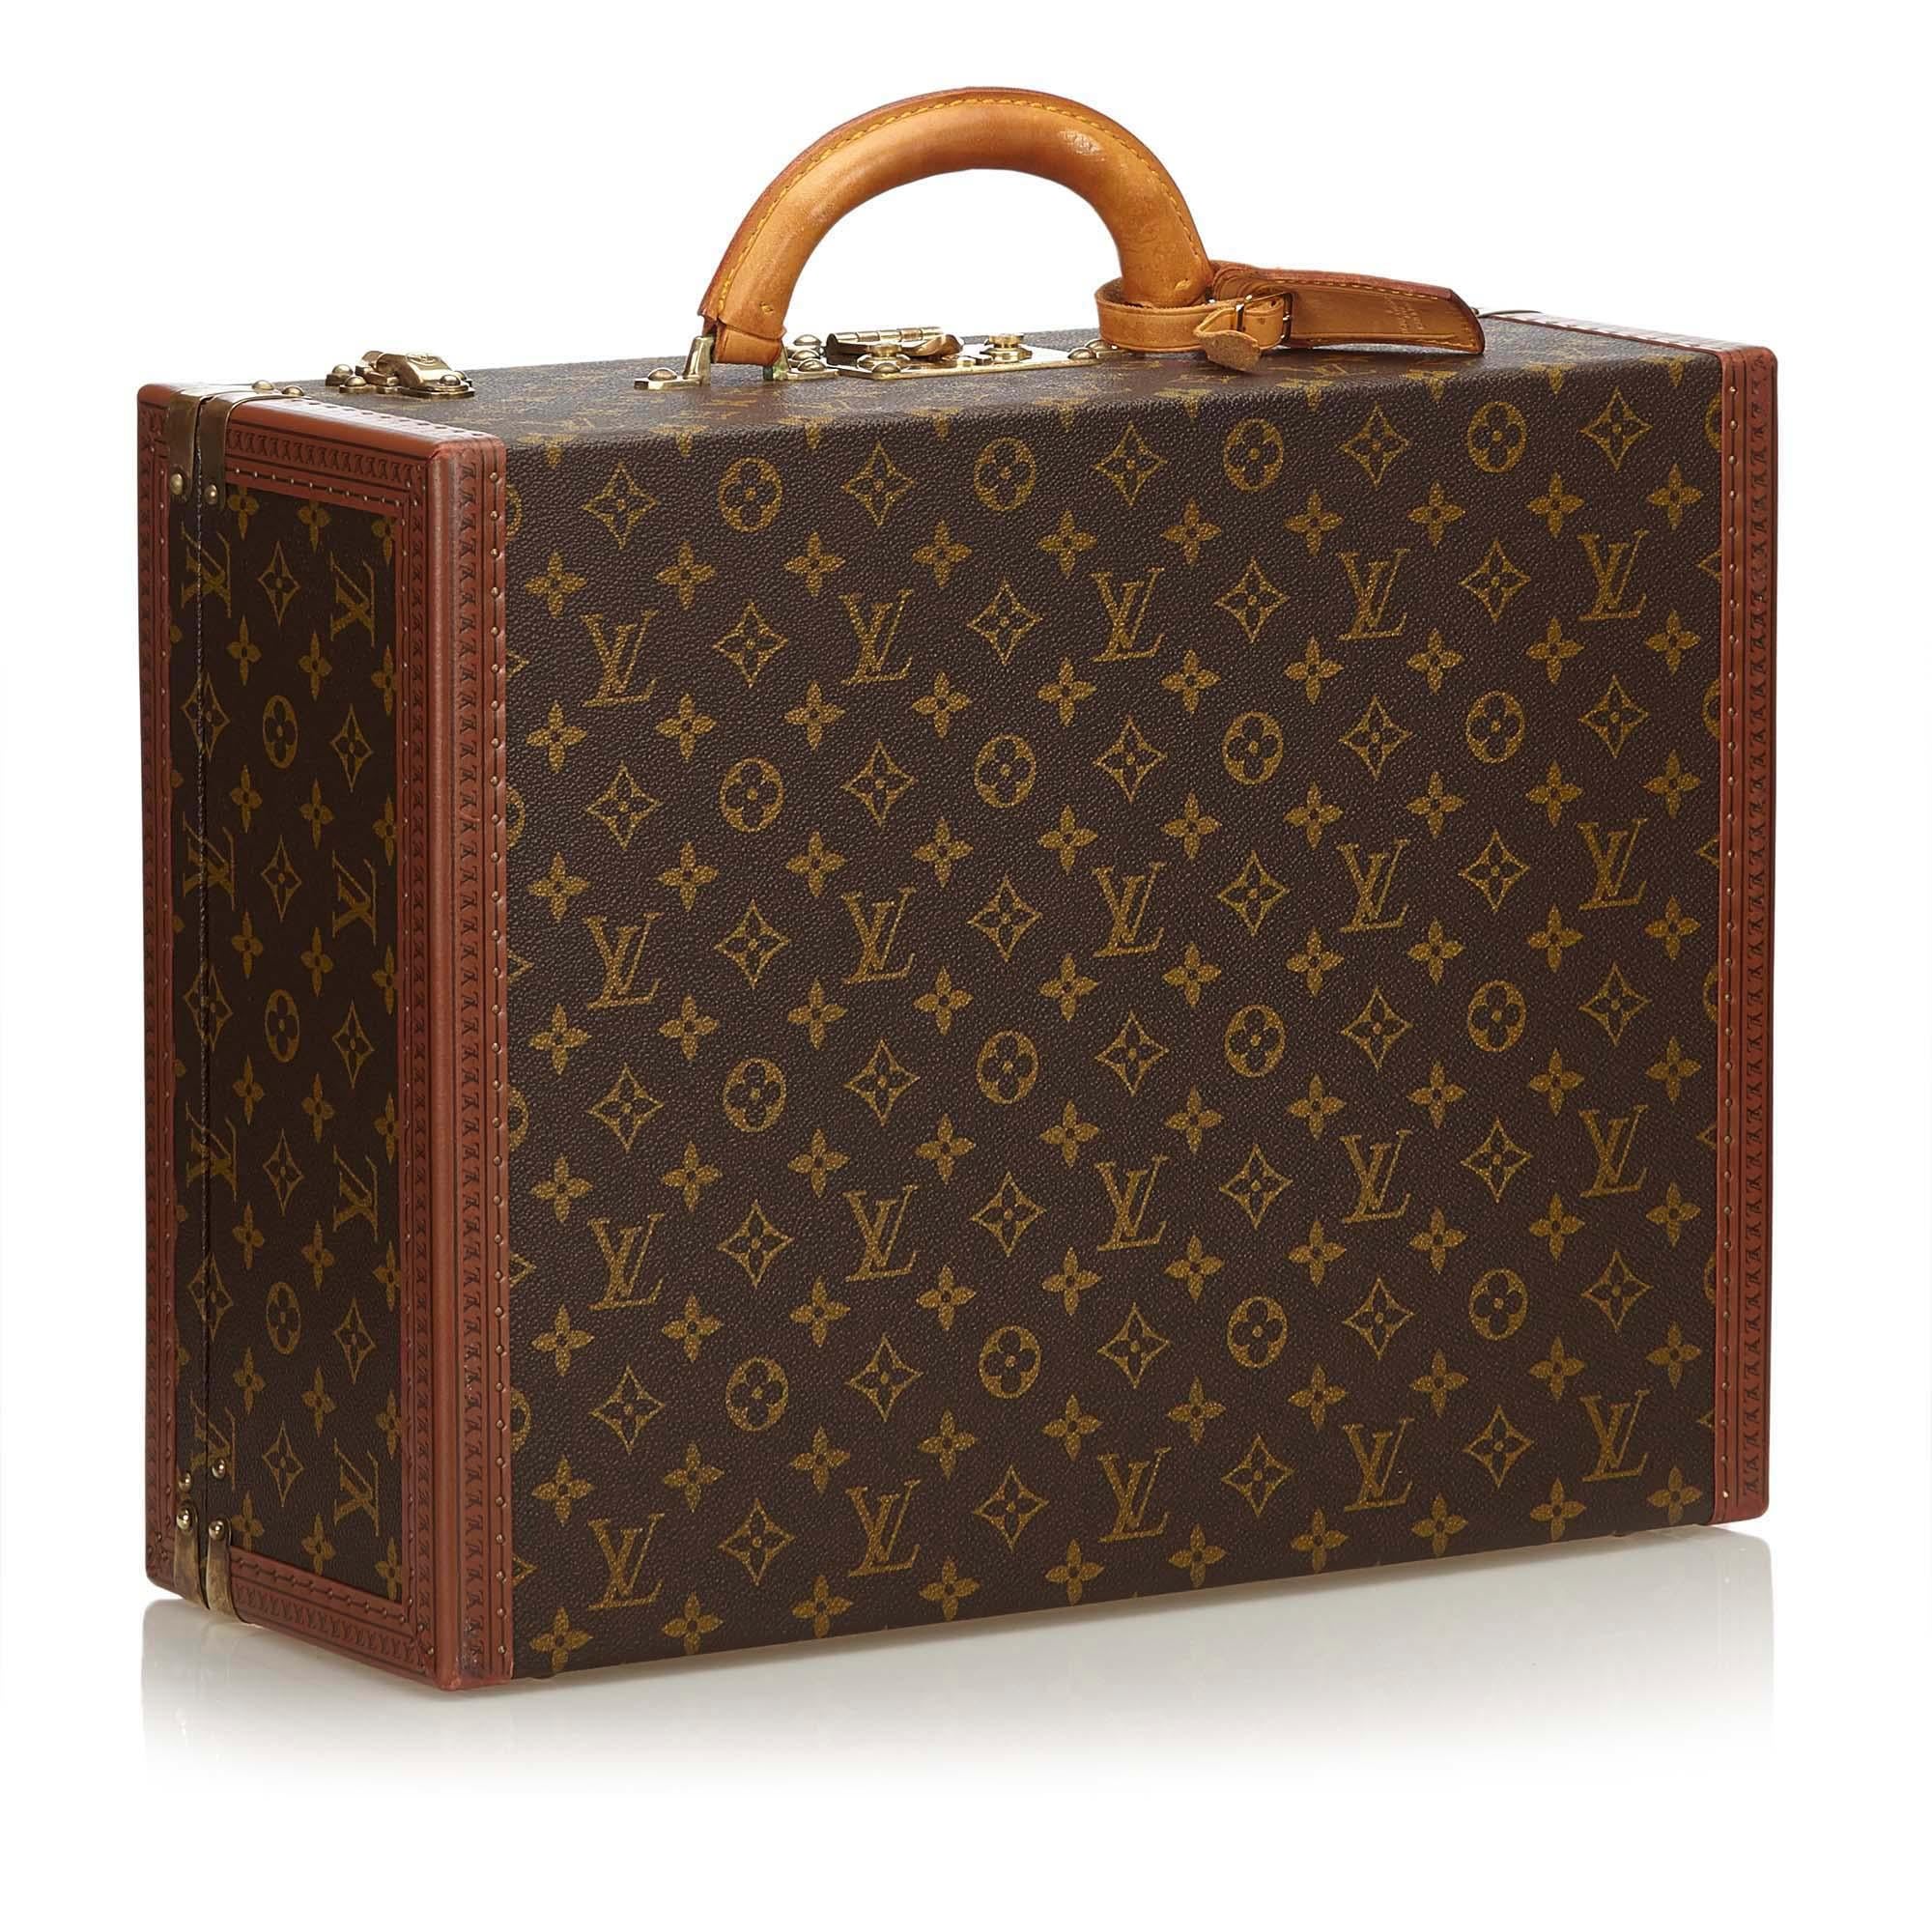 The Super President Trunk features a monogram canvas body, rolled top handle, key closure and latch closure. It carries a B+ condition rating.

nbsp; Material is moderately worn. Hardware is moderately rusty.

Dimensions: 
Length 33 cm
Width 43